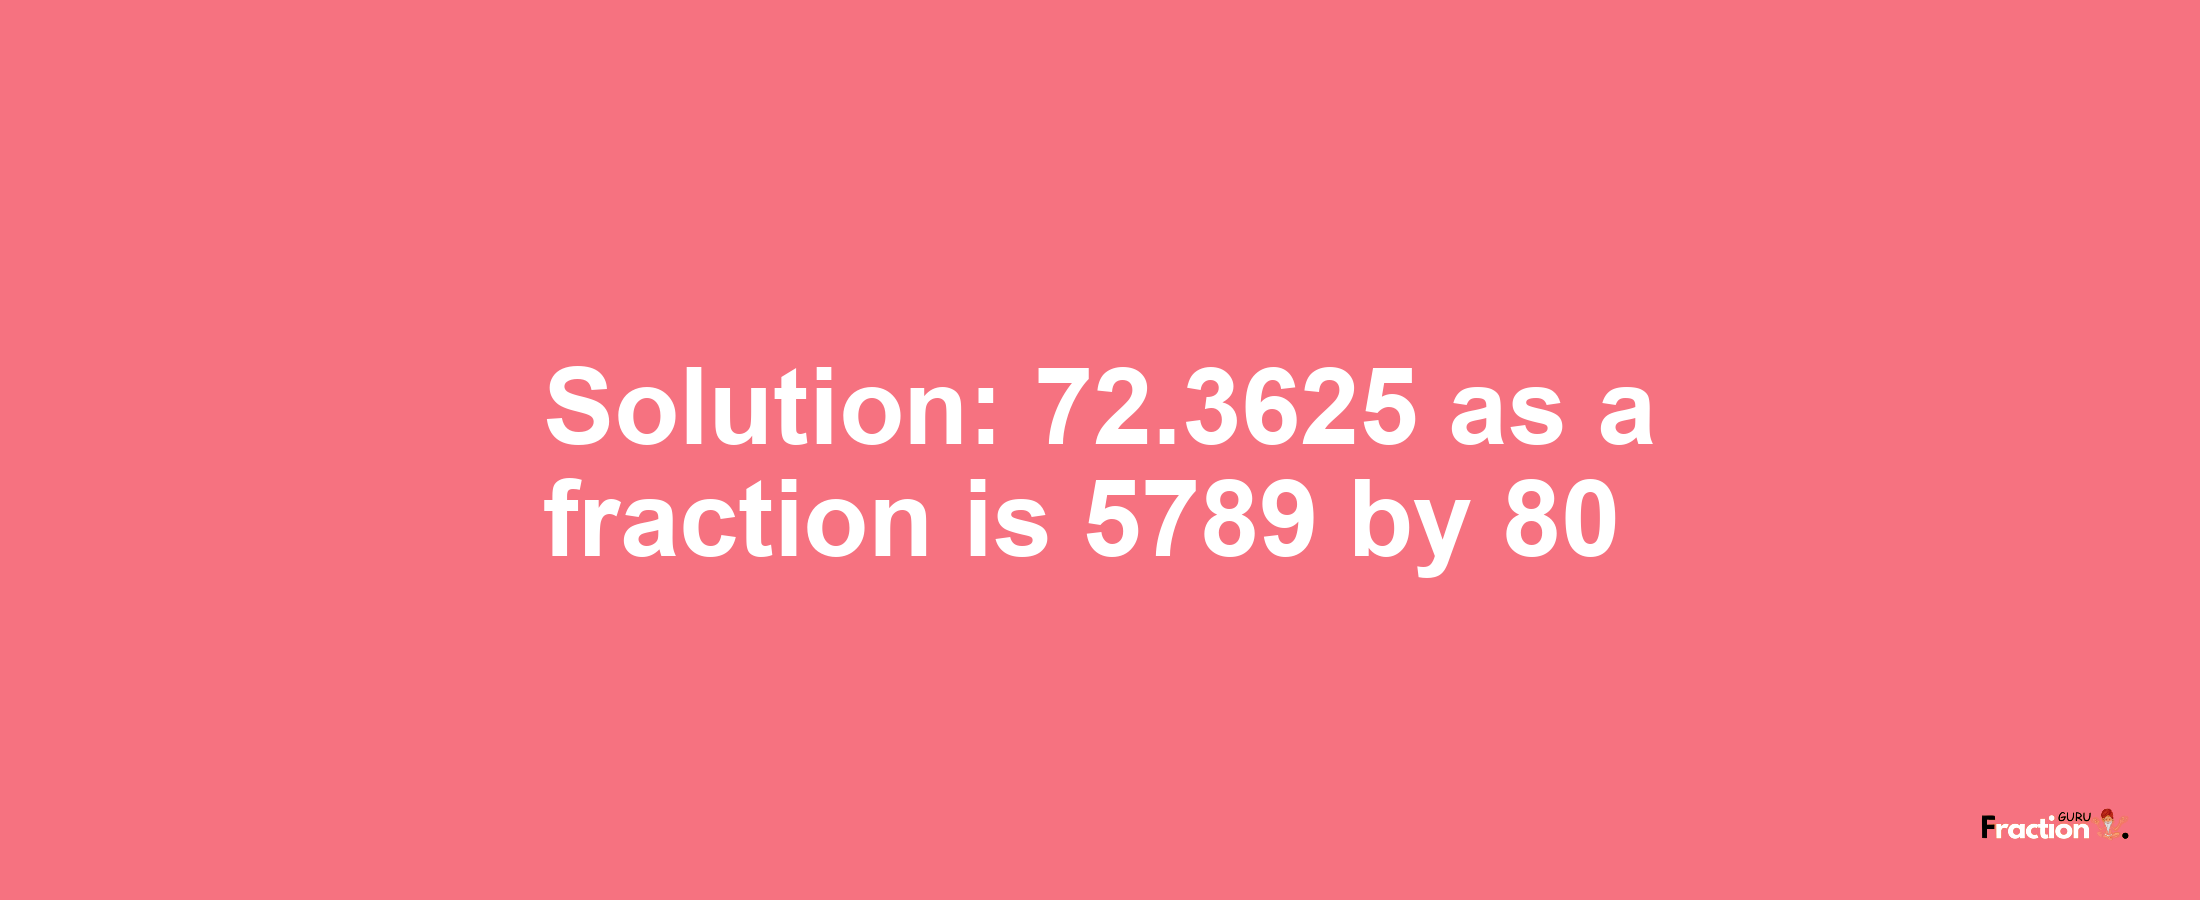 Solution:72.3625 as a fraction is 5789/80